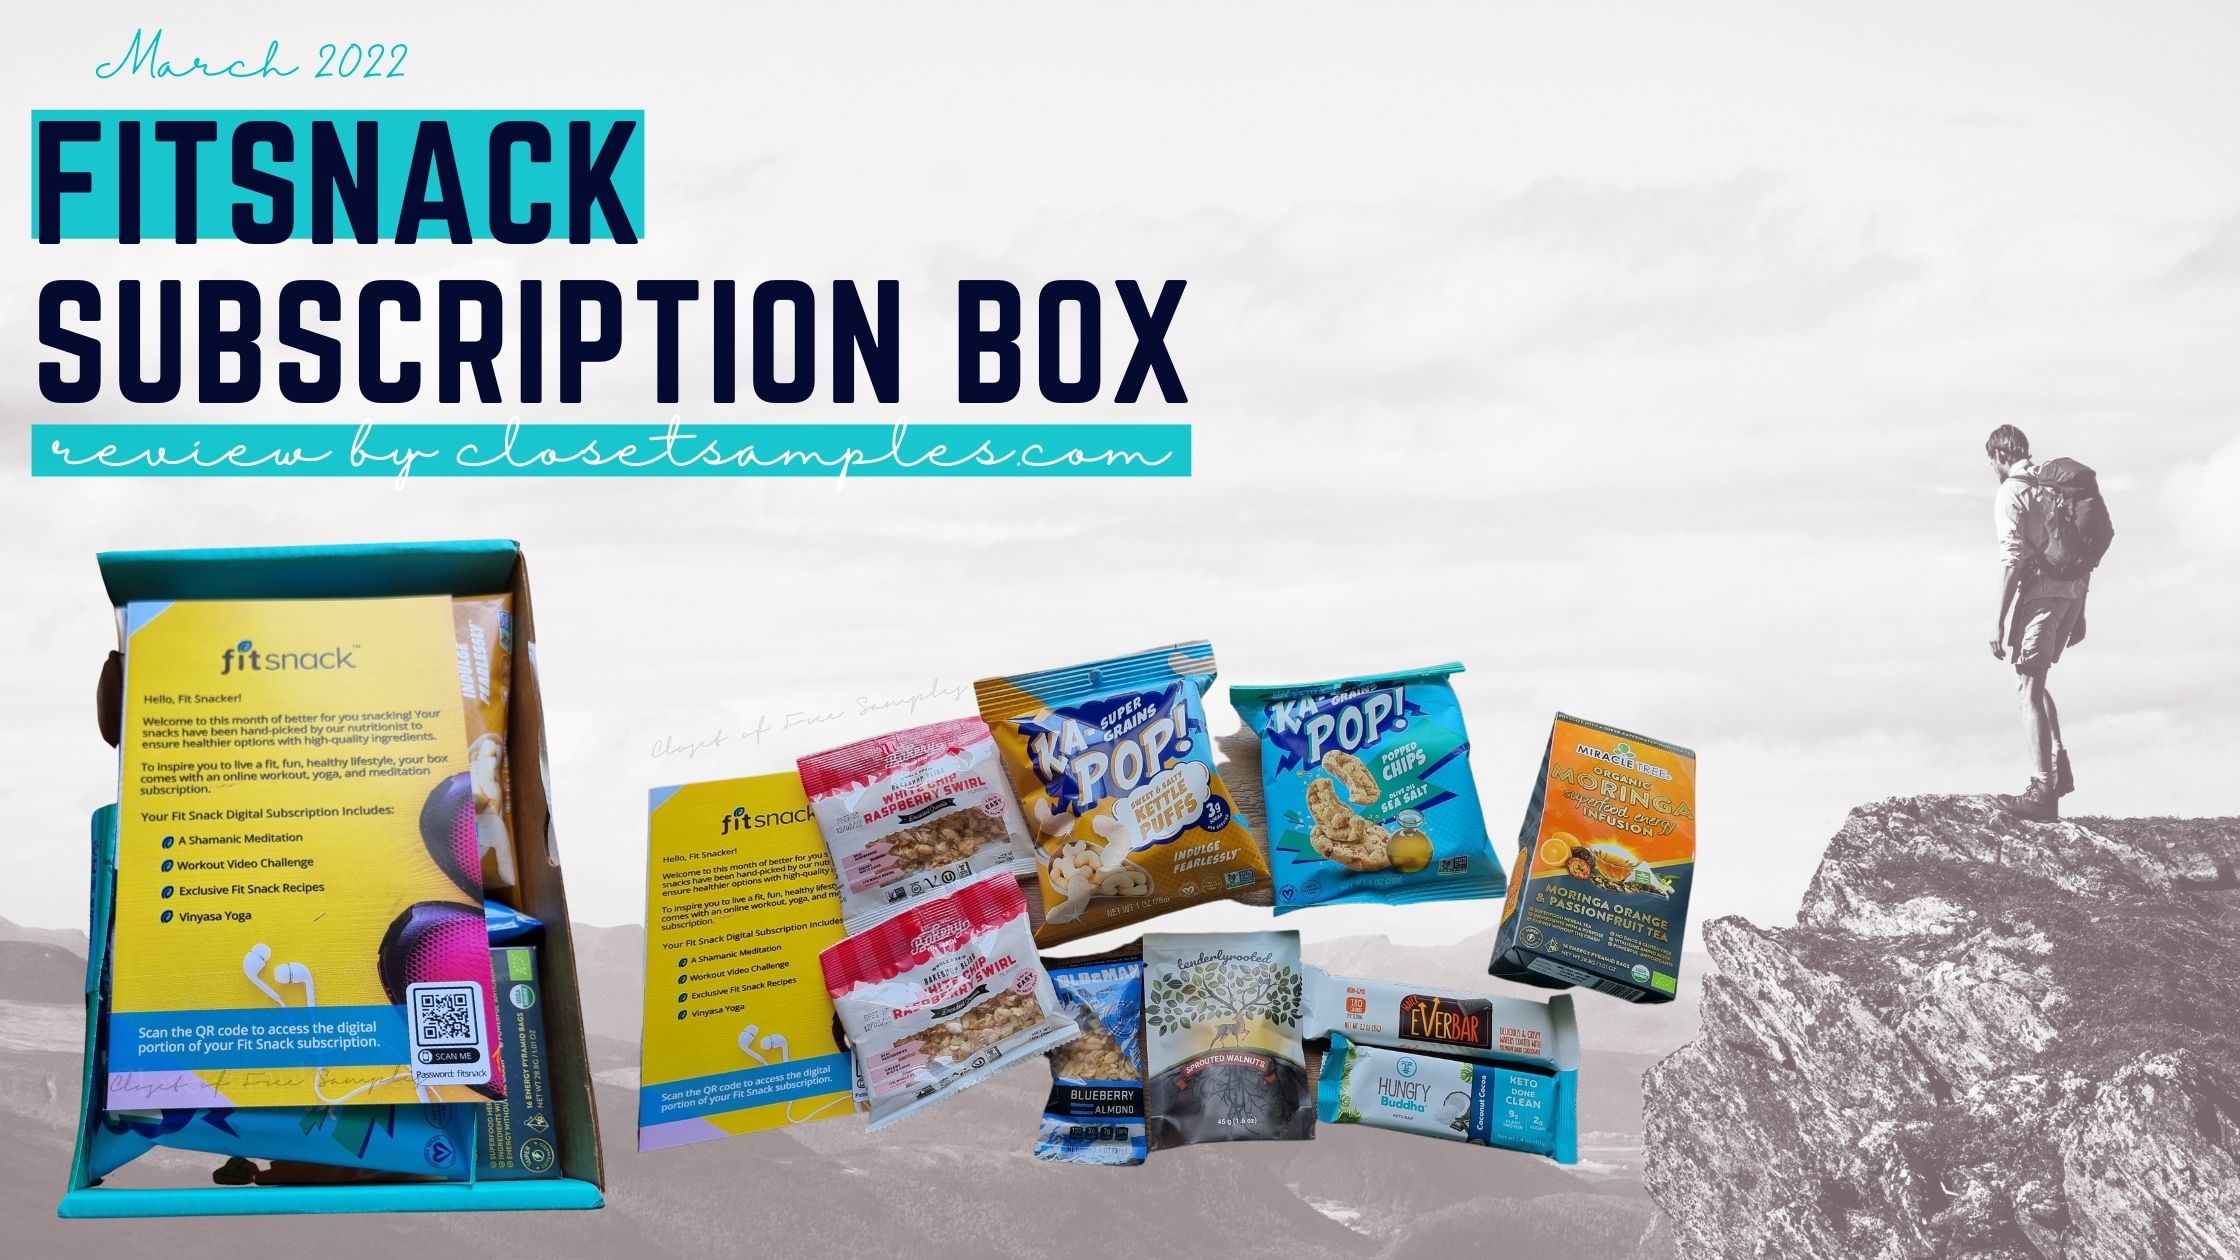 FitSnack Subscription Box March 2022 Review closetsamples